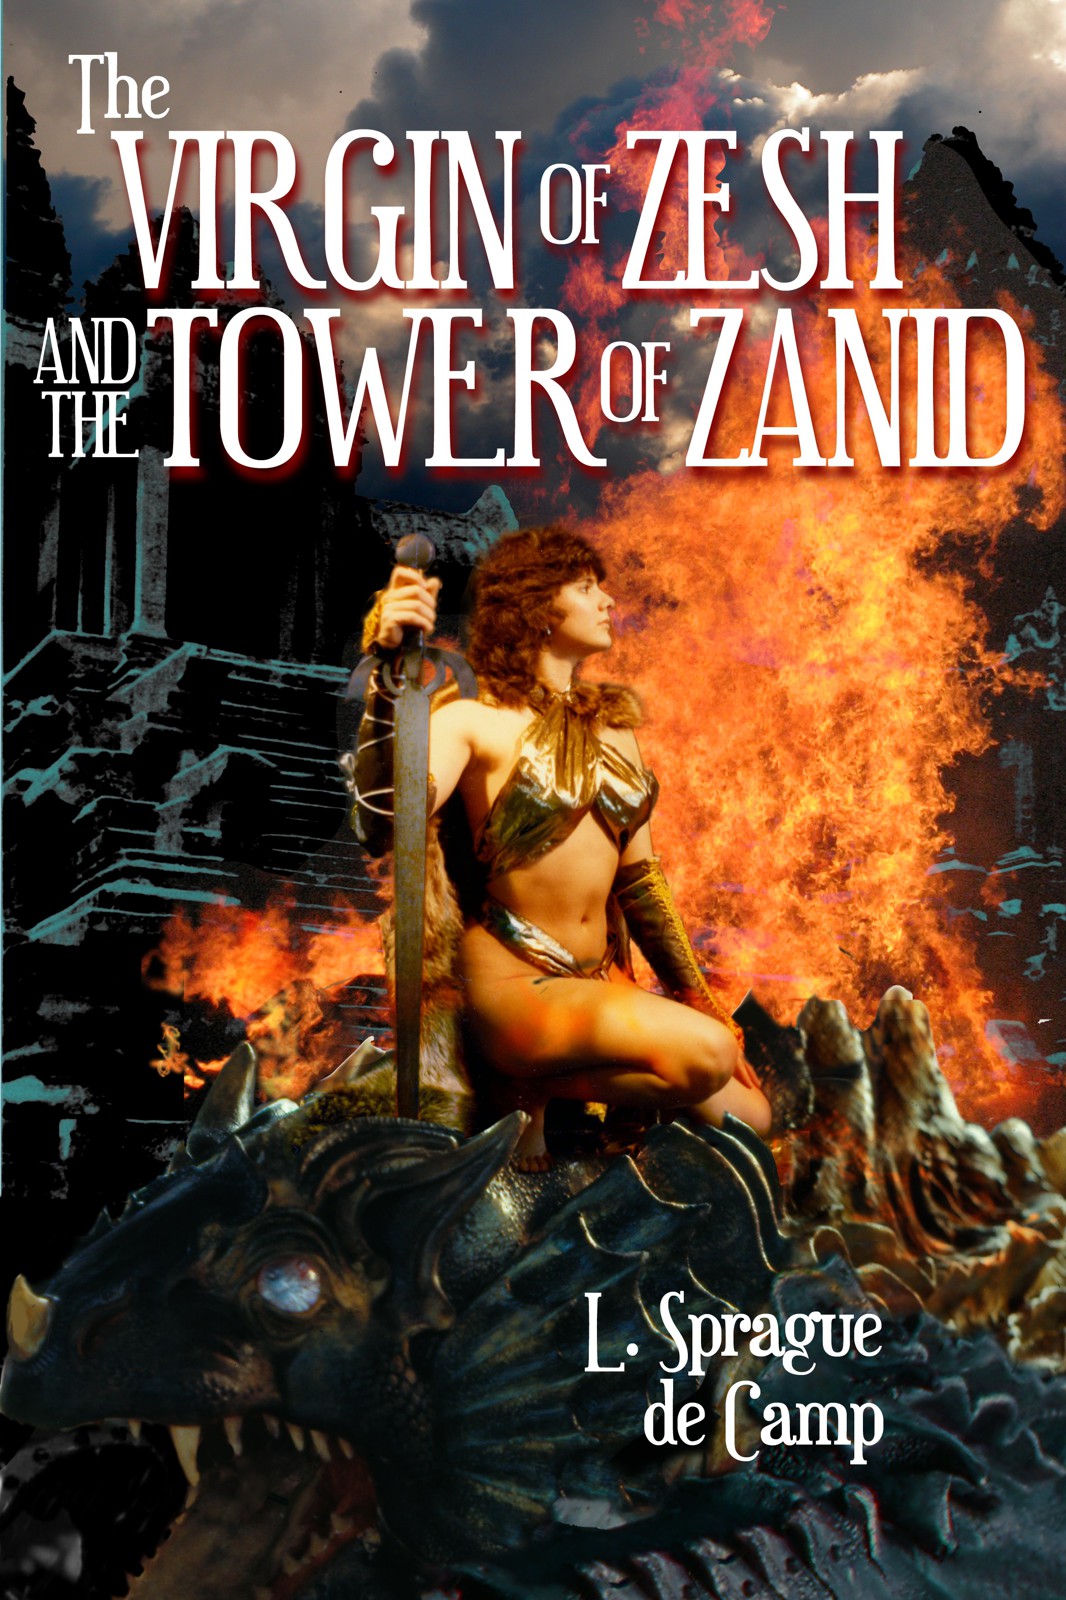 The Virgin of Zesh & the Tower of Zanid